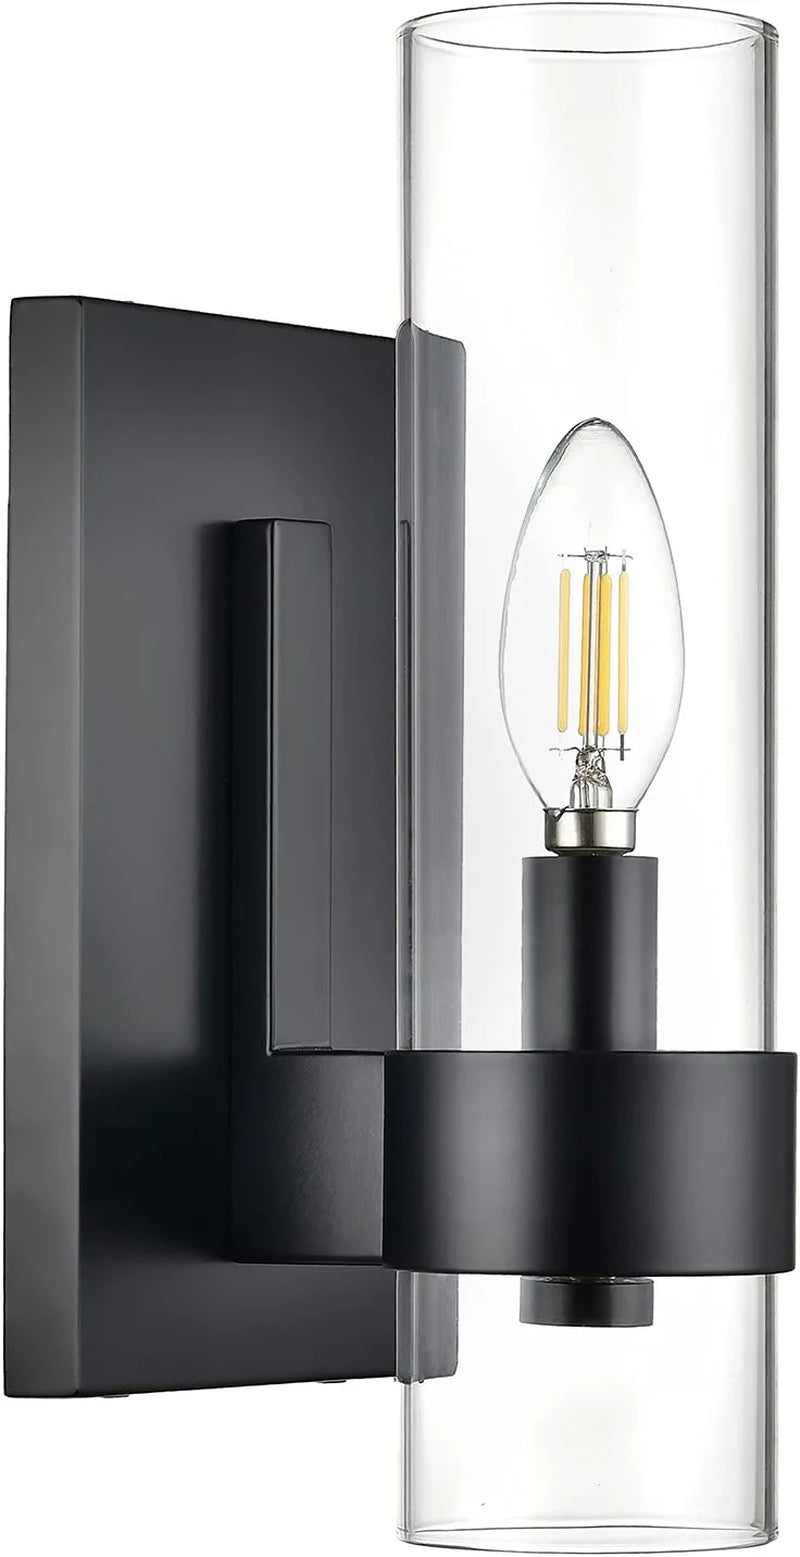 Linea Di Liara Teramo Farmhouse Matte Black Wall Sconce Wall Lighting Modern Bathroom Wall Sconces Wall Lights for Hallway and Bedroom Wall Sconce Lighting Fixture - Frosted Glass Shade Home & Garden > Lighting > Lighting Fixtures > Chandeliers Linea di Liara Black/Clear Wall Sconce 